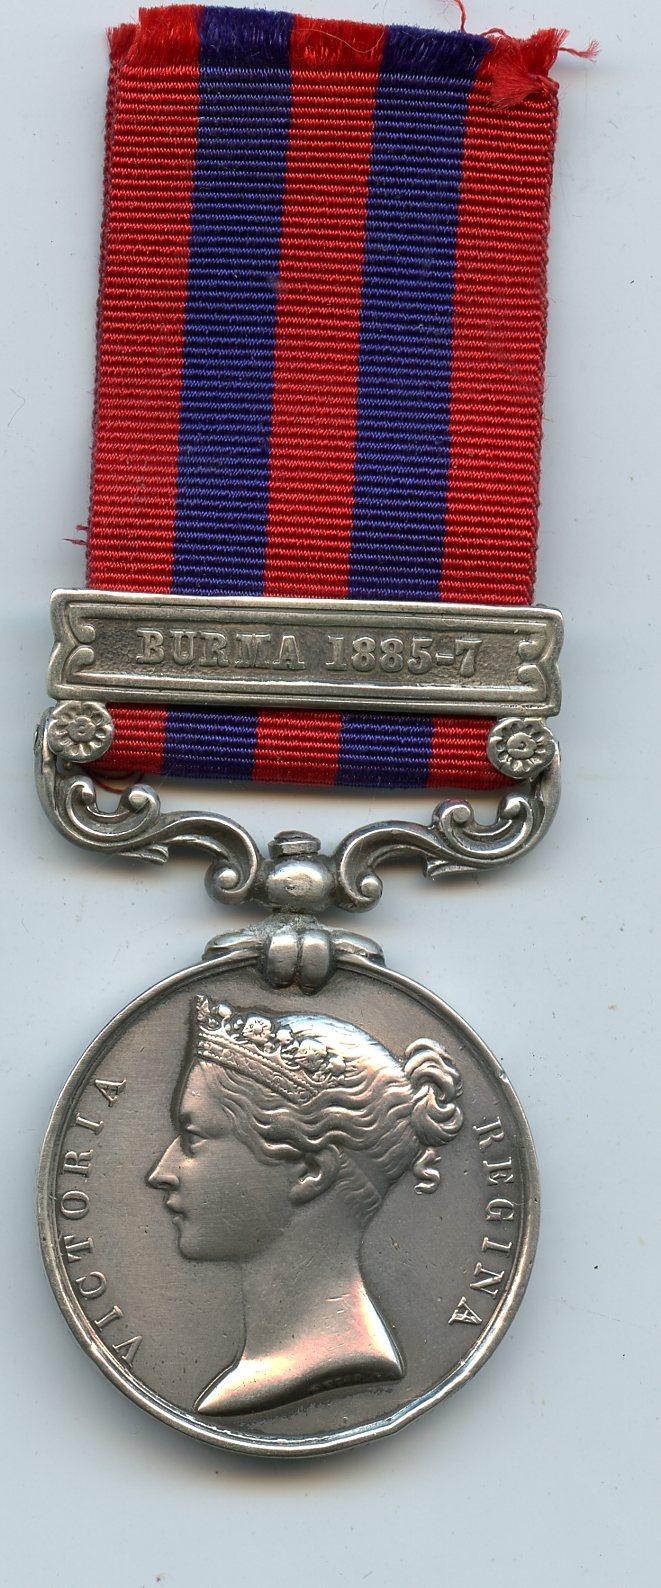 India General Service Medal 1854 1 Clasp Burma 1885-7 To Pte George Williams, 2nd Royal West Surrey Regiment